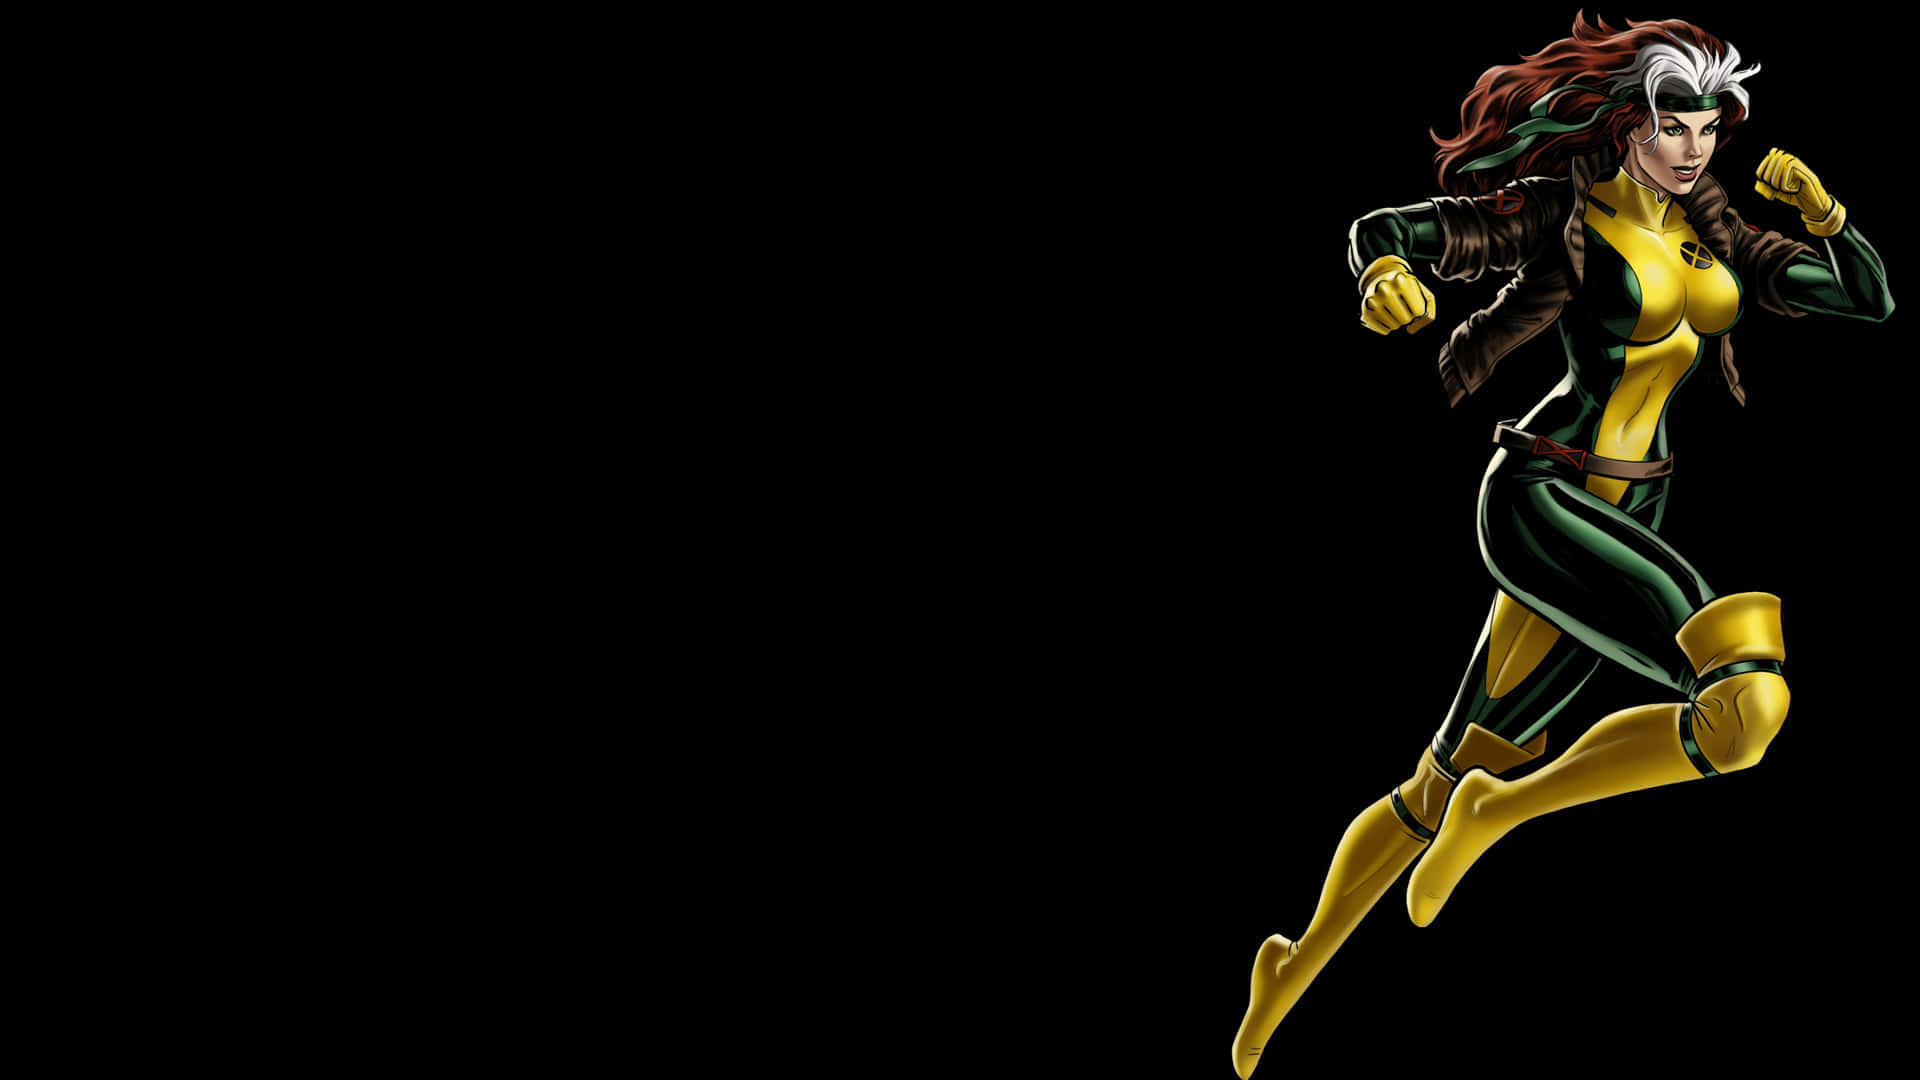 A Female Superhero In Yellow And Green Costume Running Wallpaper